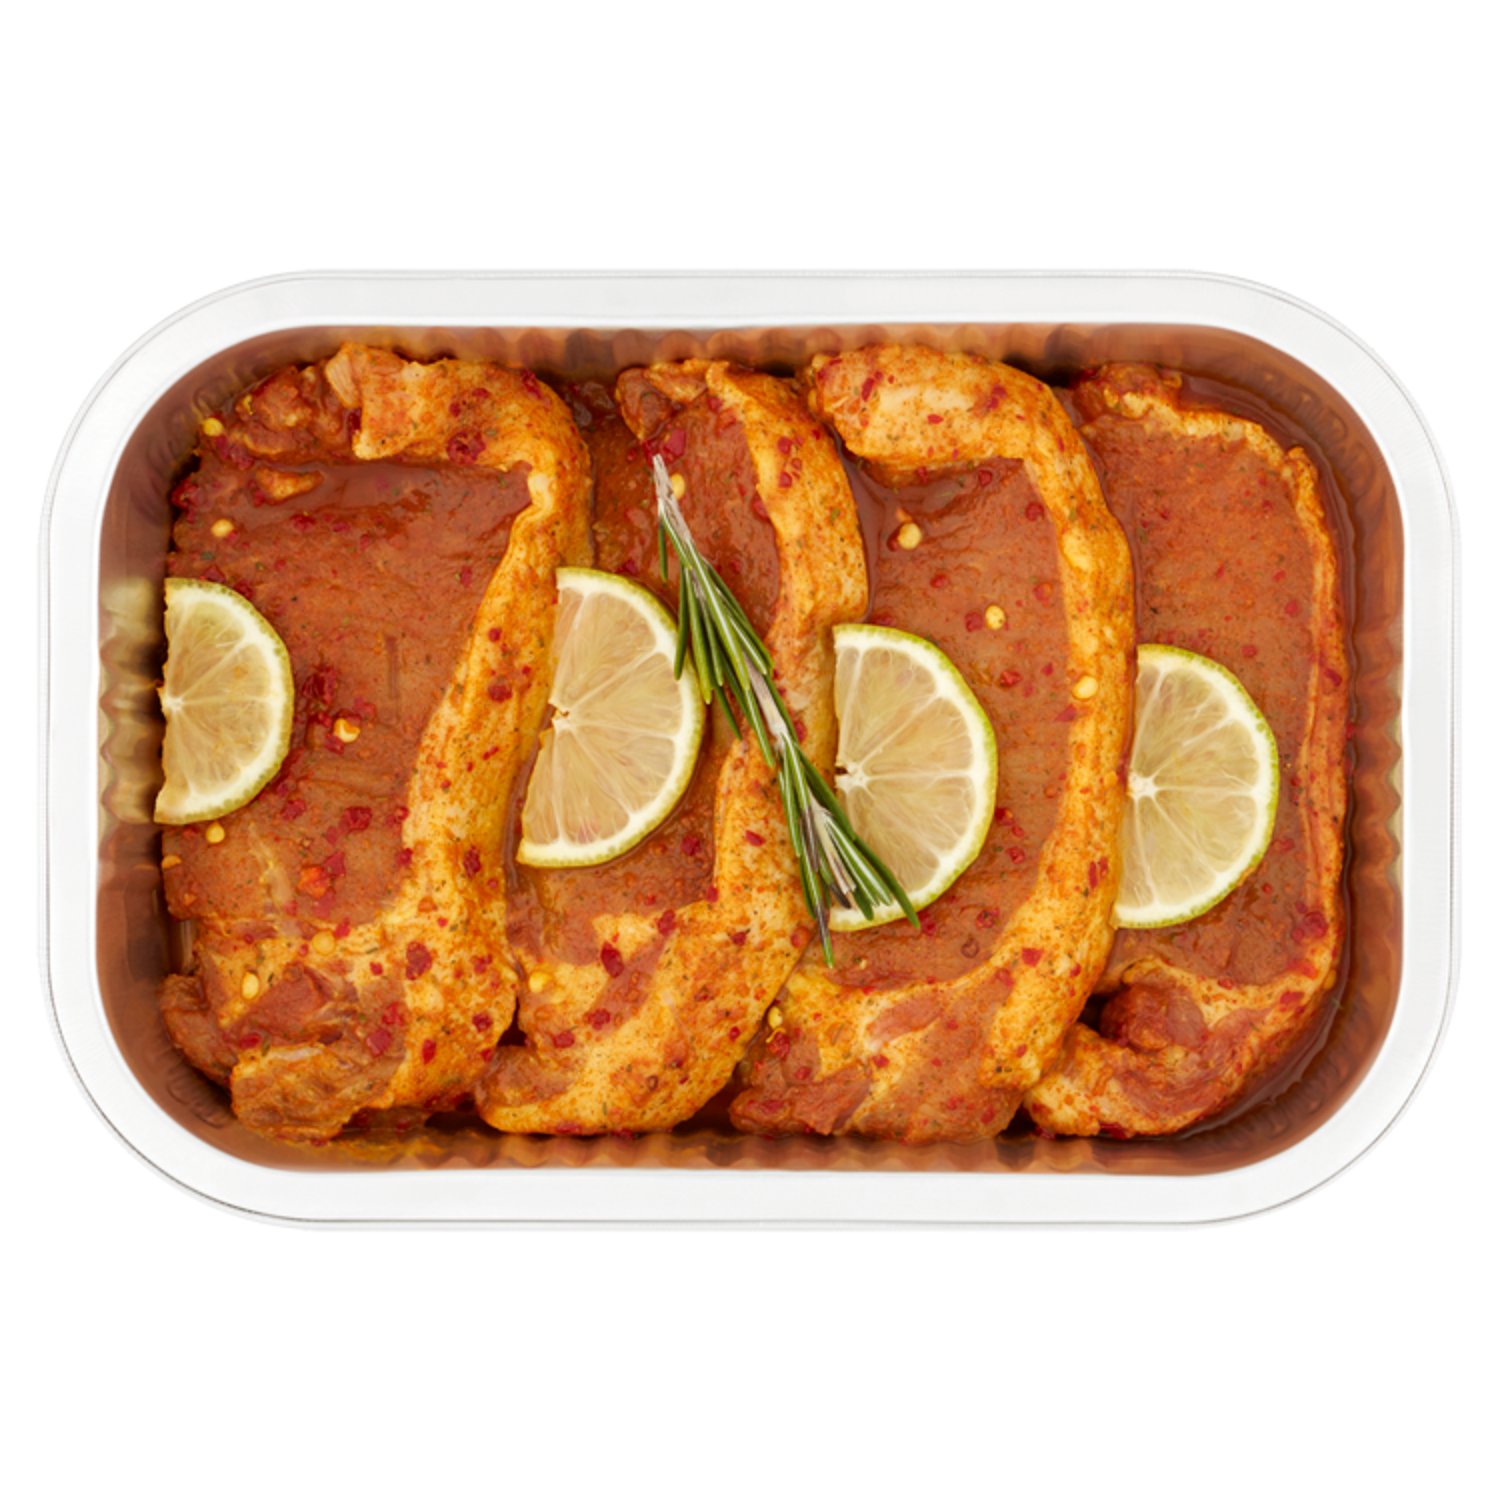 Prepared By Our Butcher Ginger Chilli & Lime Glazed Irish Pork Chops (1 Piece)